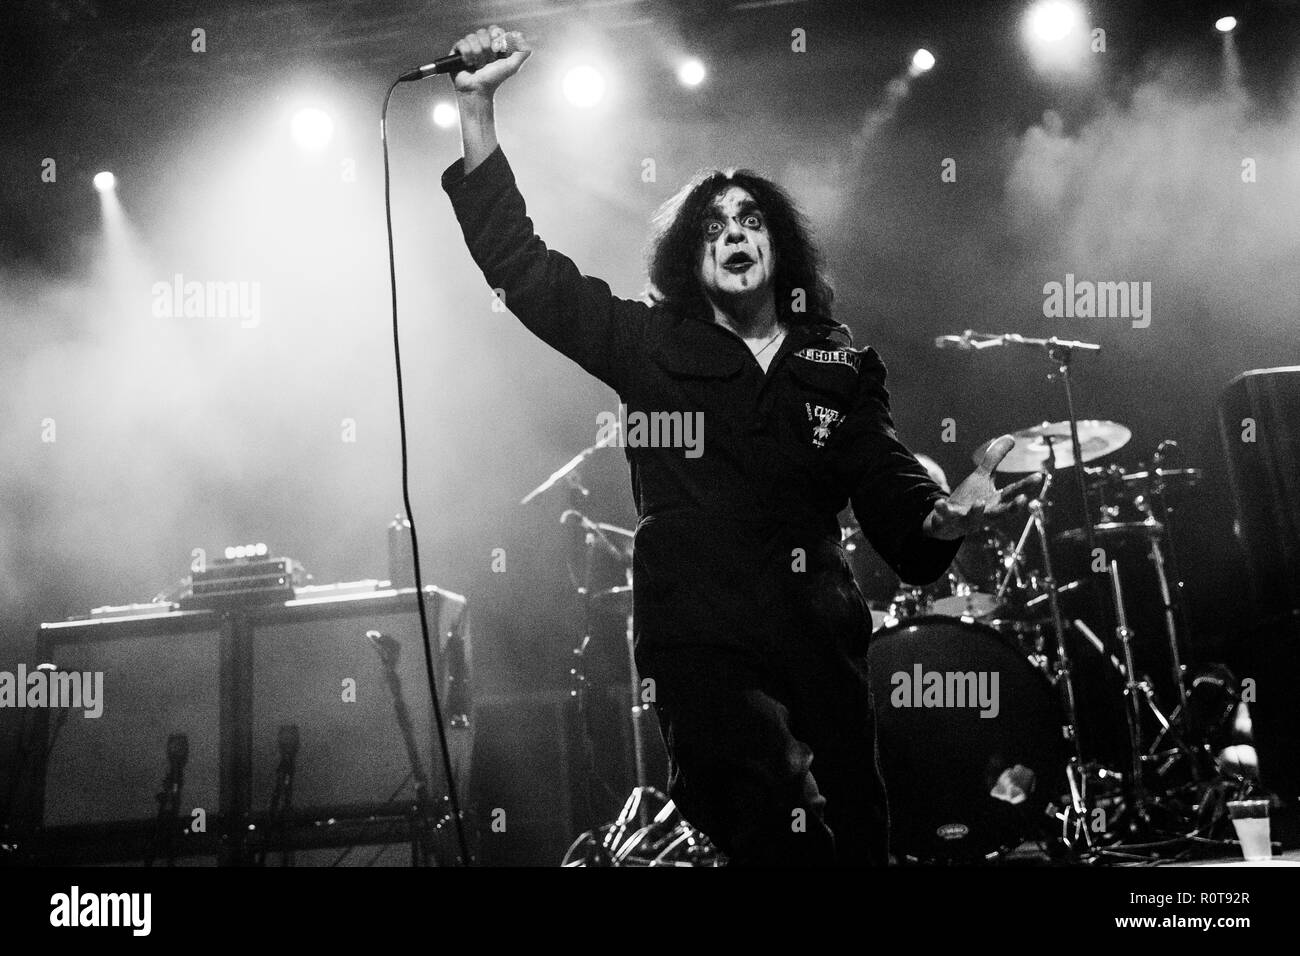 Killing Joke (vocallist Jaz Coleman) live performance in Newcastle 4th November 2018 at Northumbria Institute in black and white Stock Photo